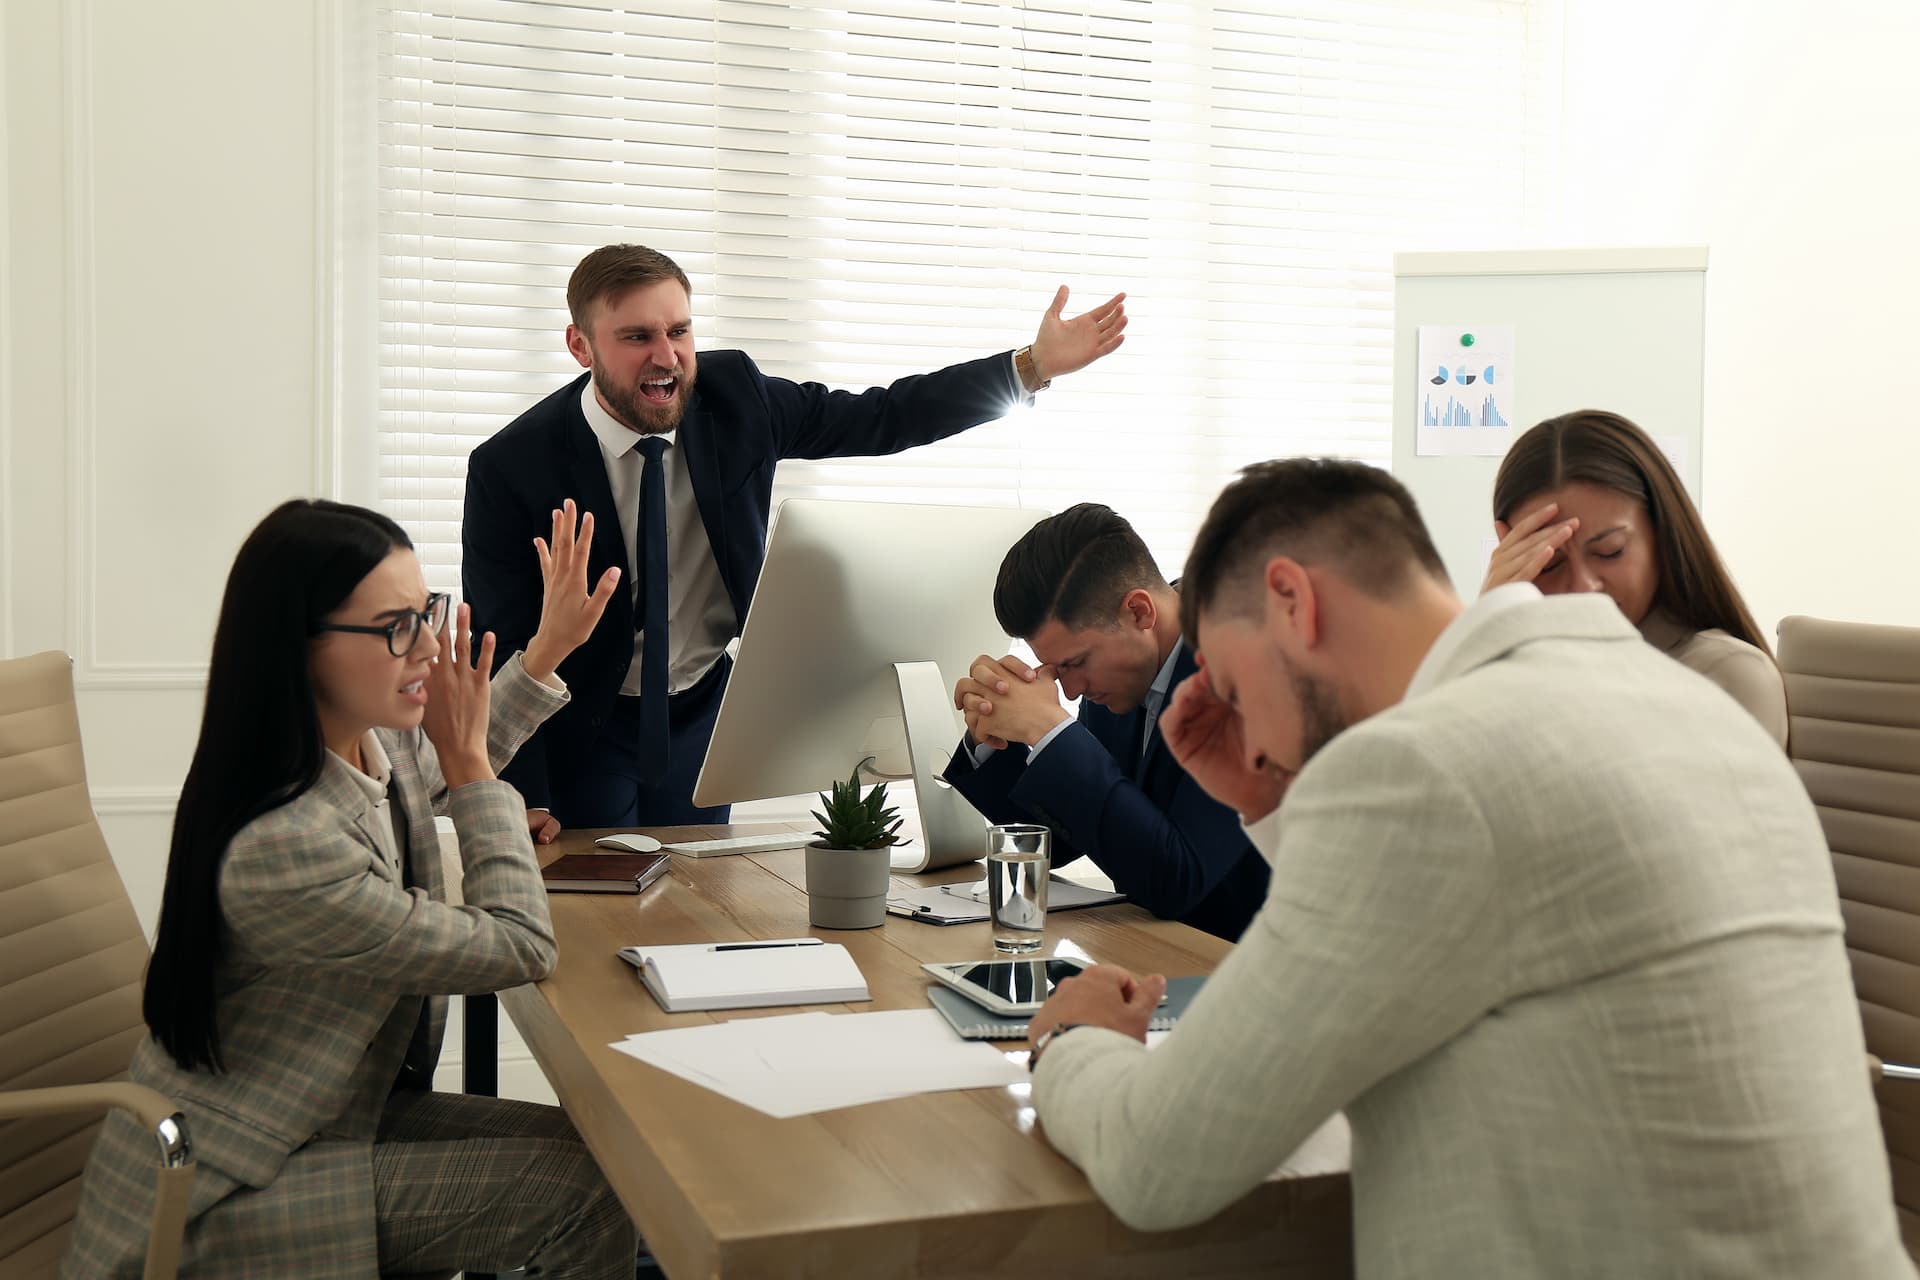 Boss screaming at employees at meeting in office showing a toxic work environment.